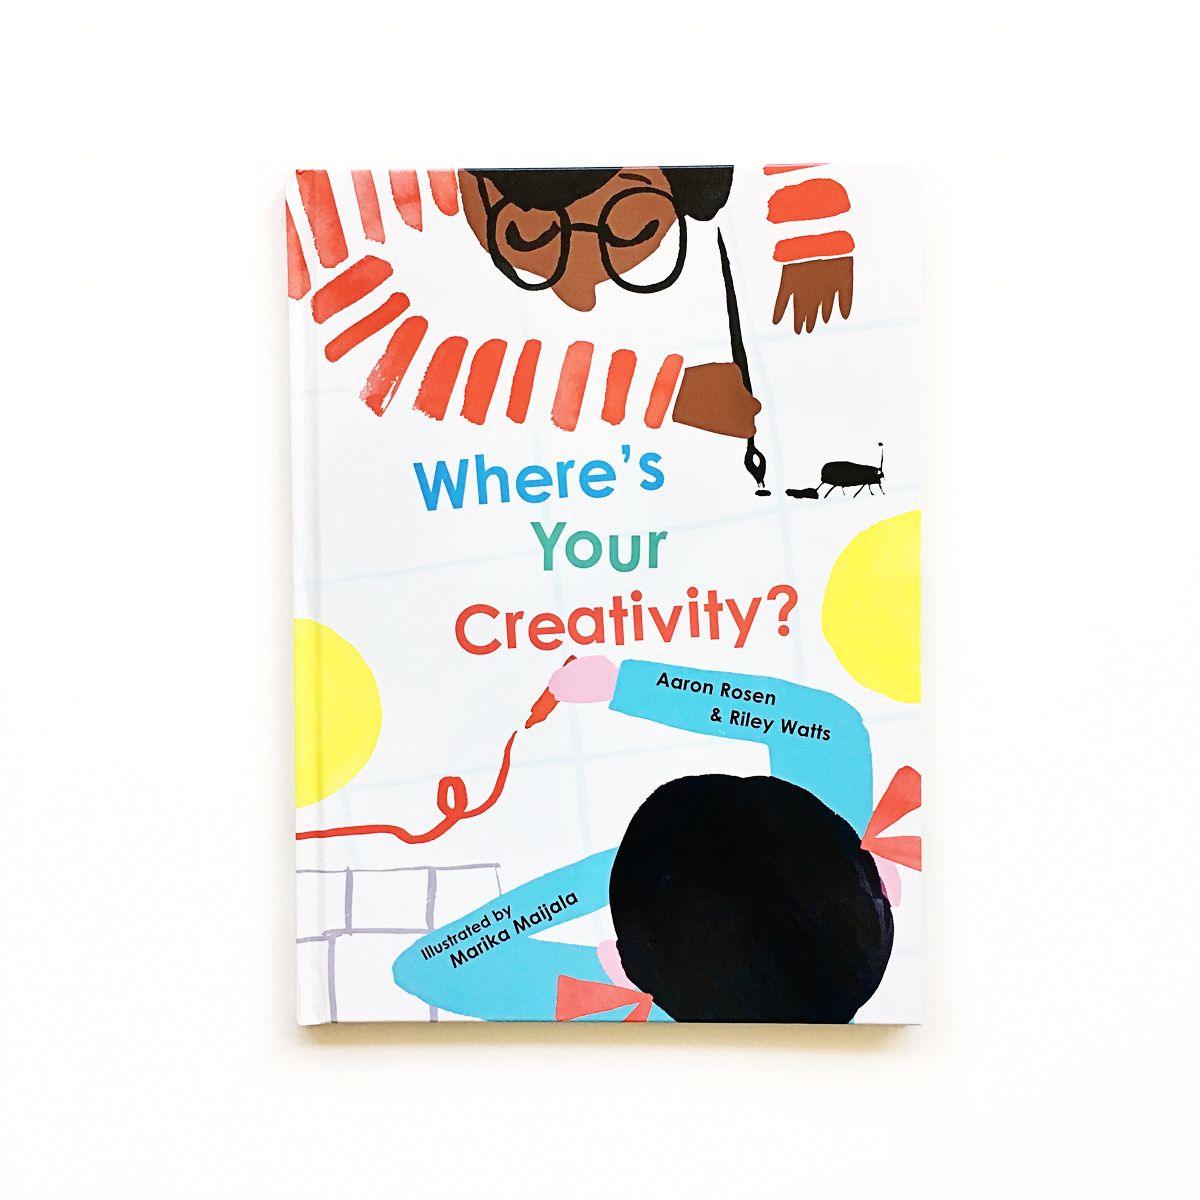 My Name Art Playdates & Creativity Guide — The Creativity Project